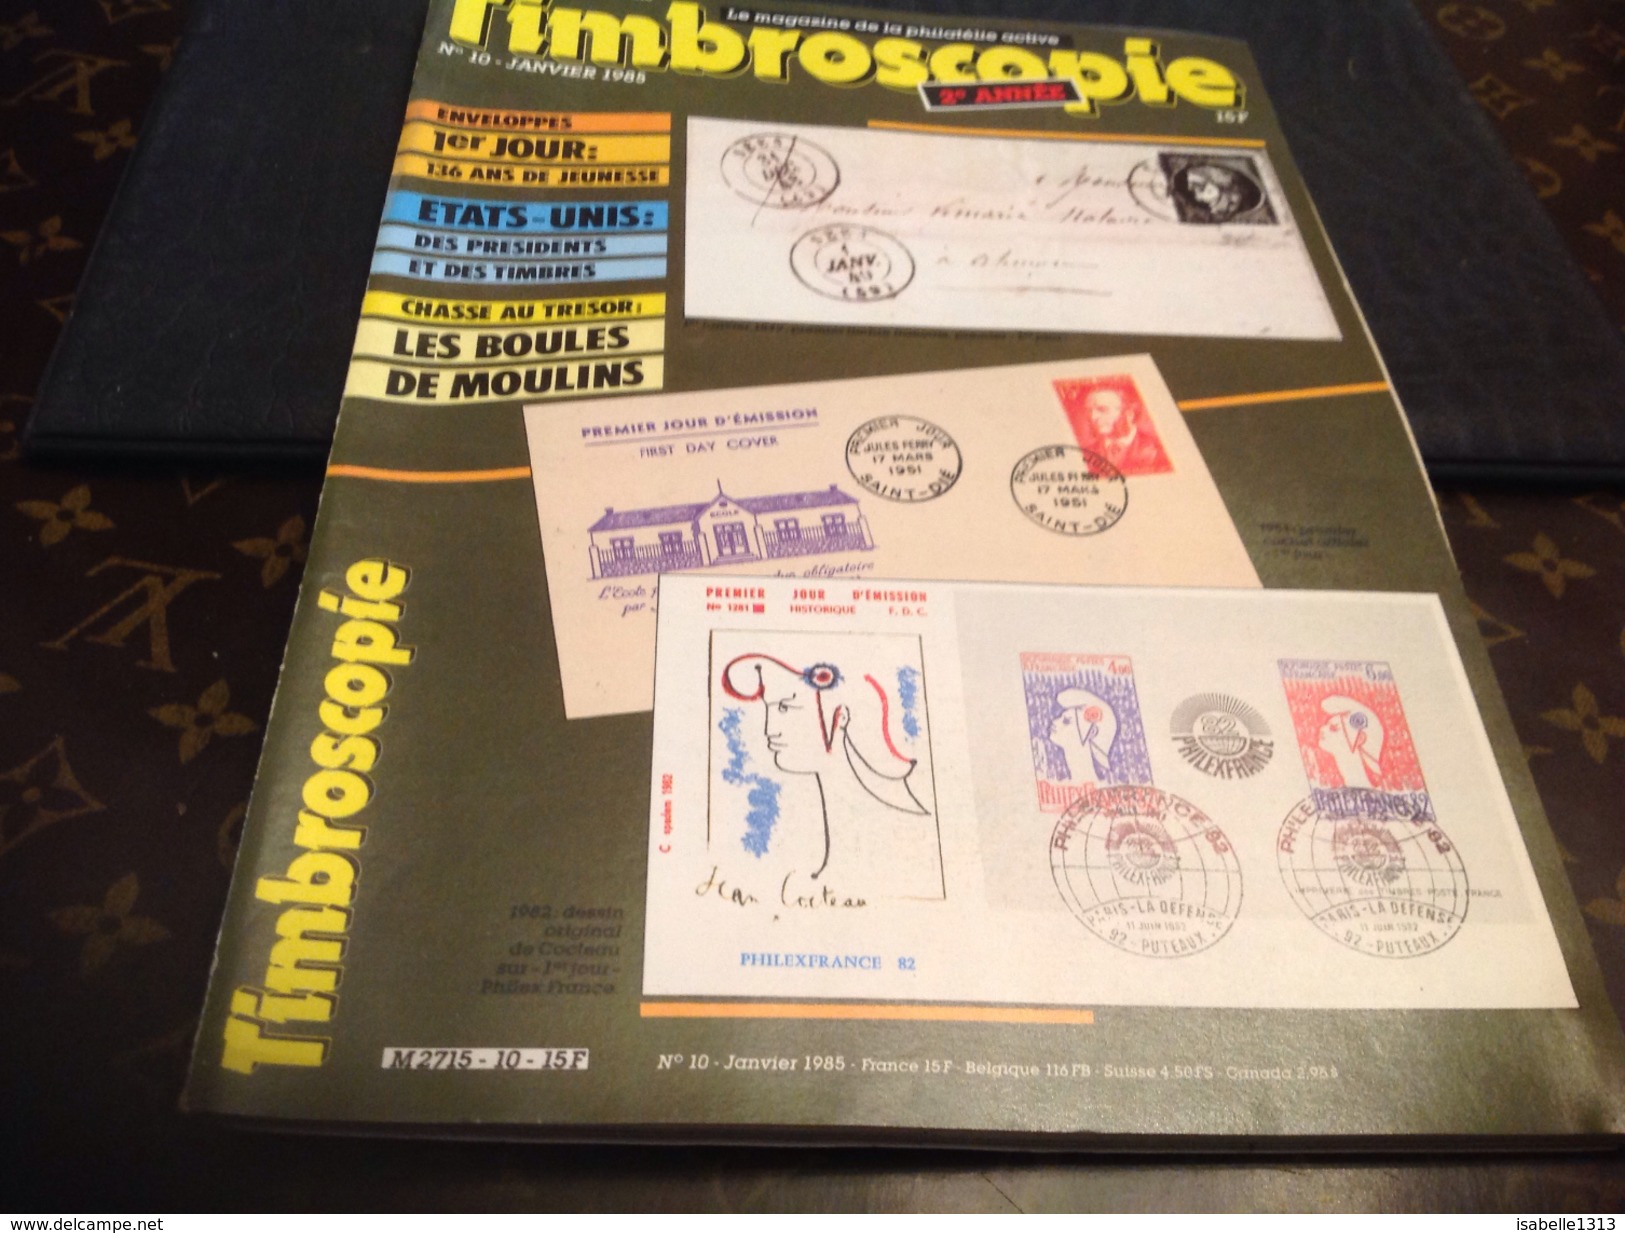 Timbroscopie 1985  1 Jour - French (until 1940)